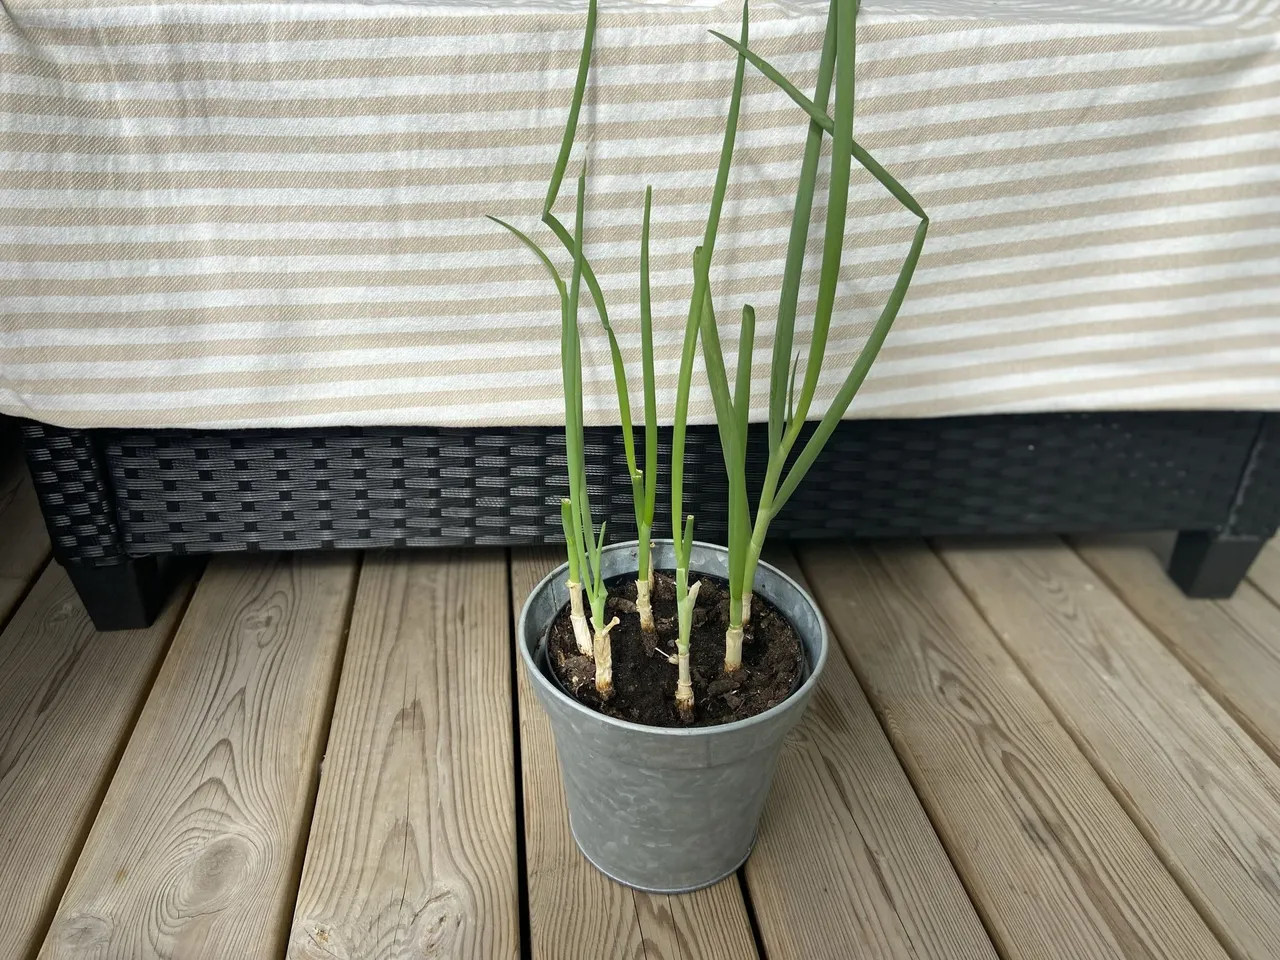 My spring onions looks kind of defeted. But it's only because of a lot of wind and because they grew very tall in no time!